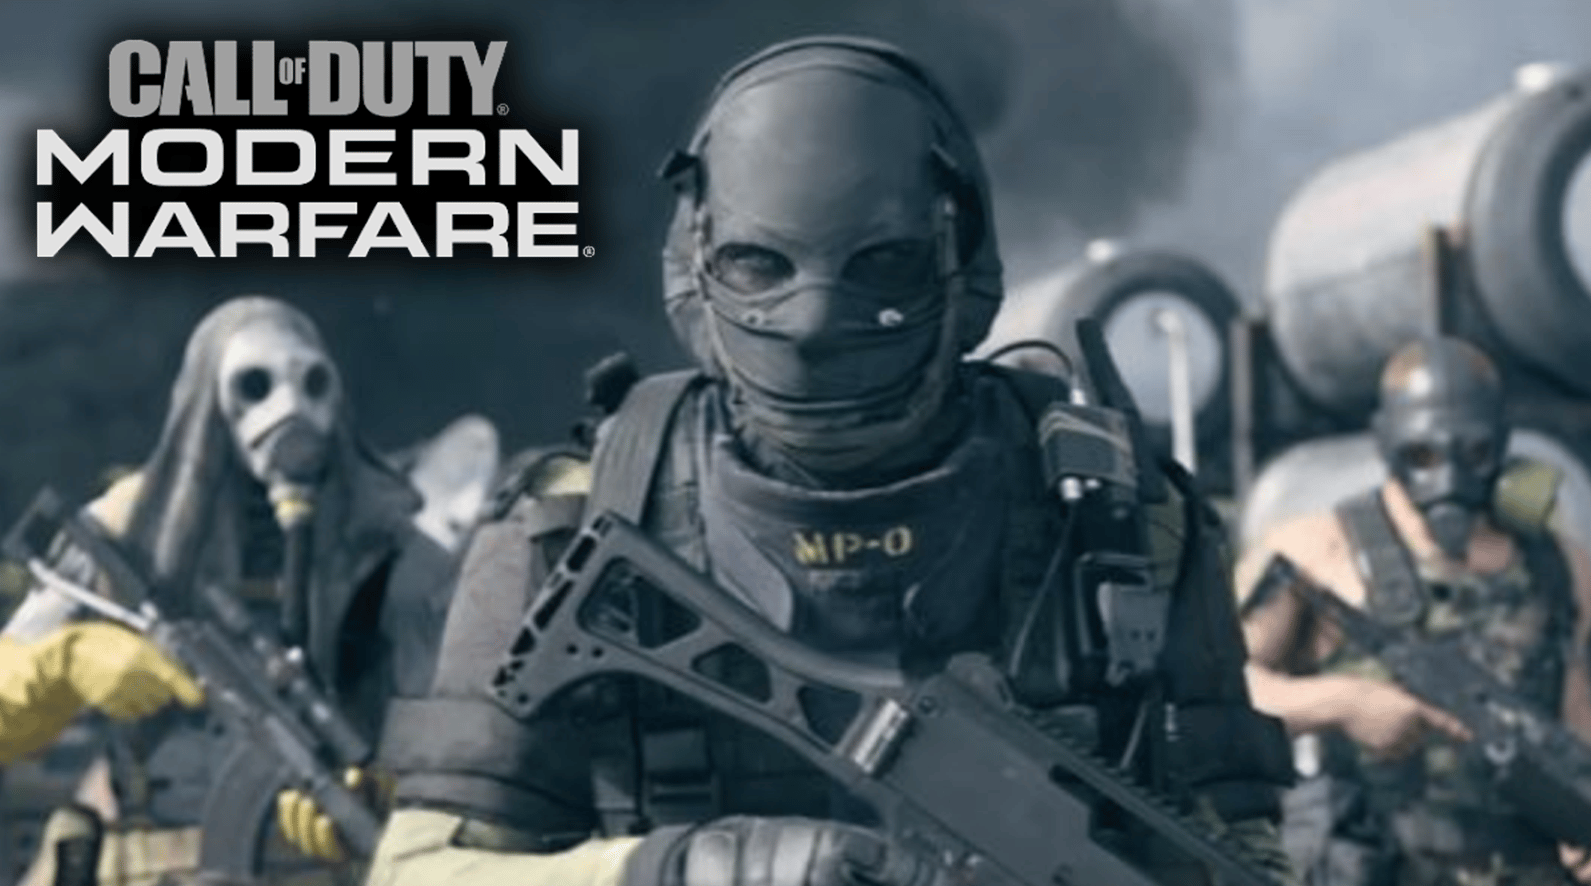 Call of Duty Fans Want Iconic Infinite Warfare Operator to Return